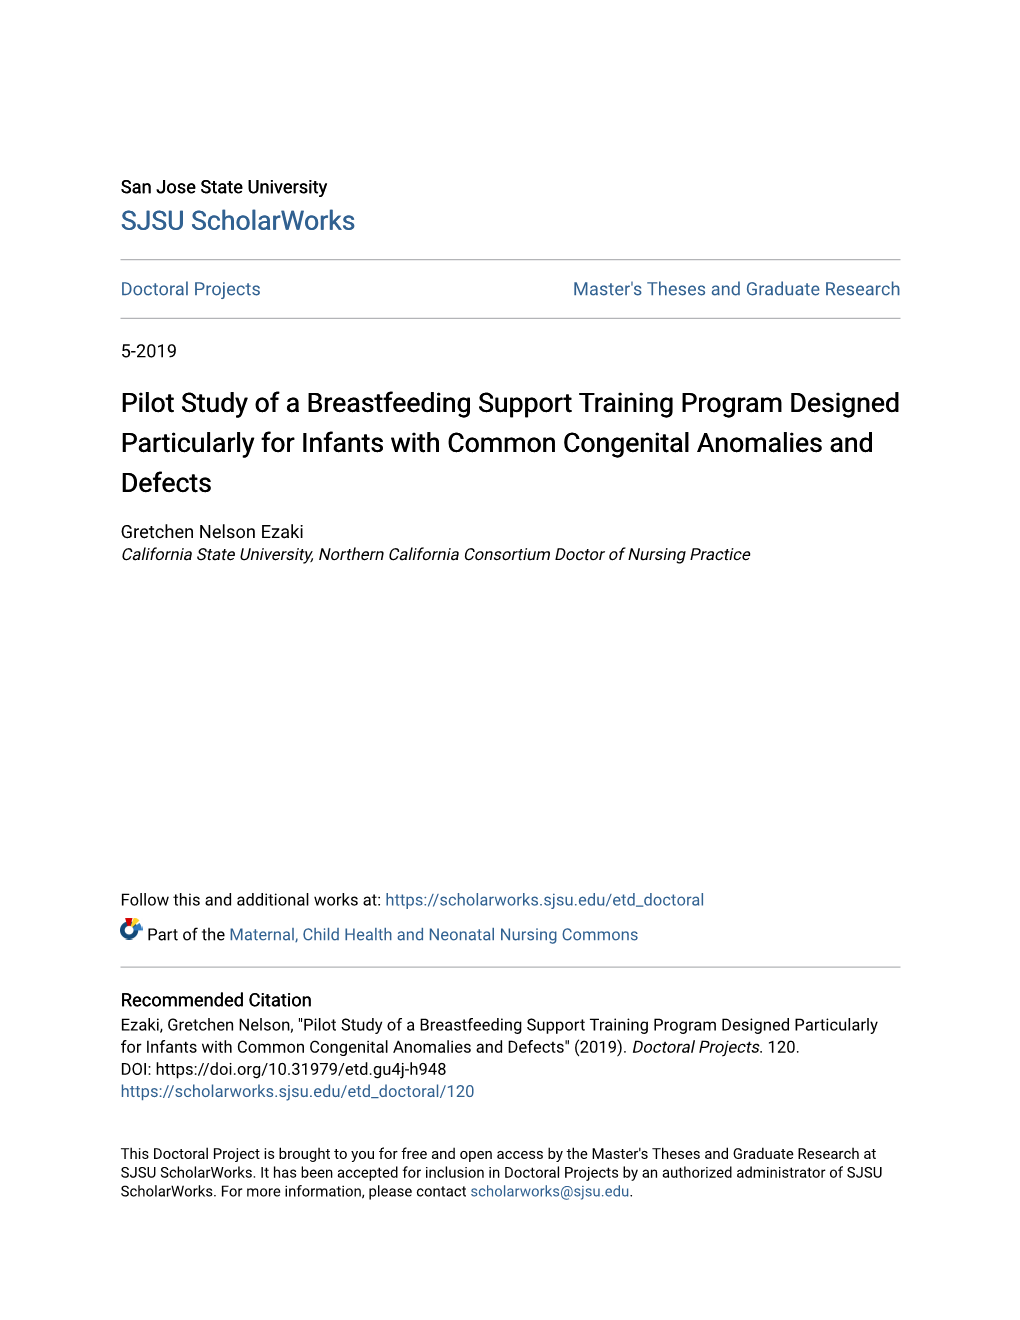 Pilot Study of a Breastfeeding Support Training Program Designed Particularly for Infants with Common Congenital Anomalies and Defects